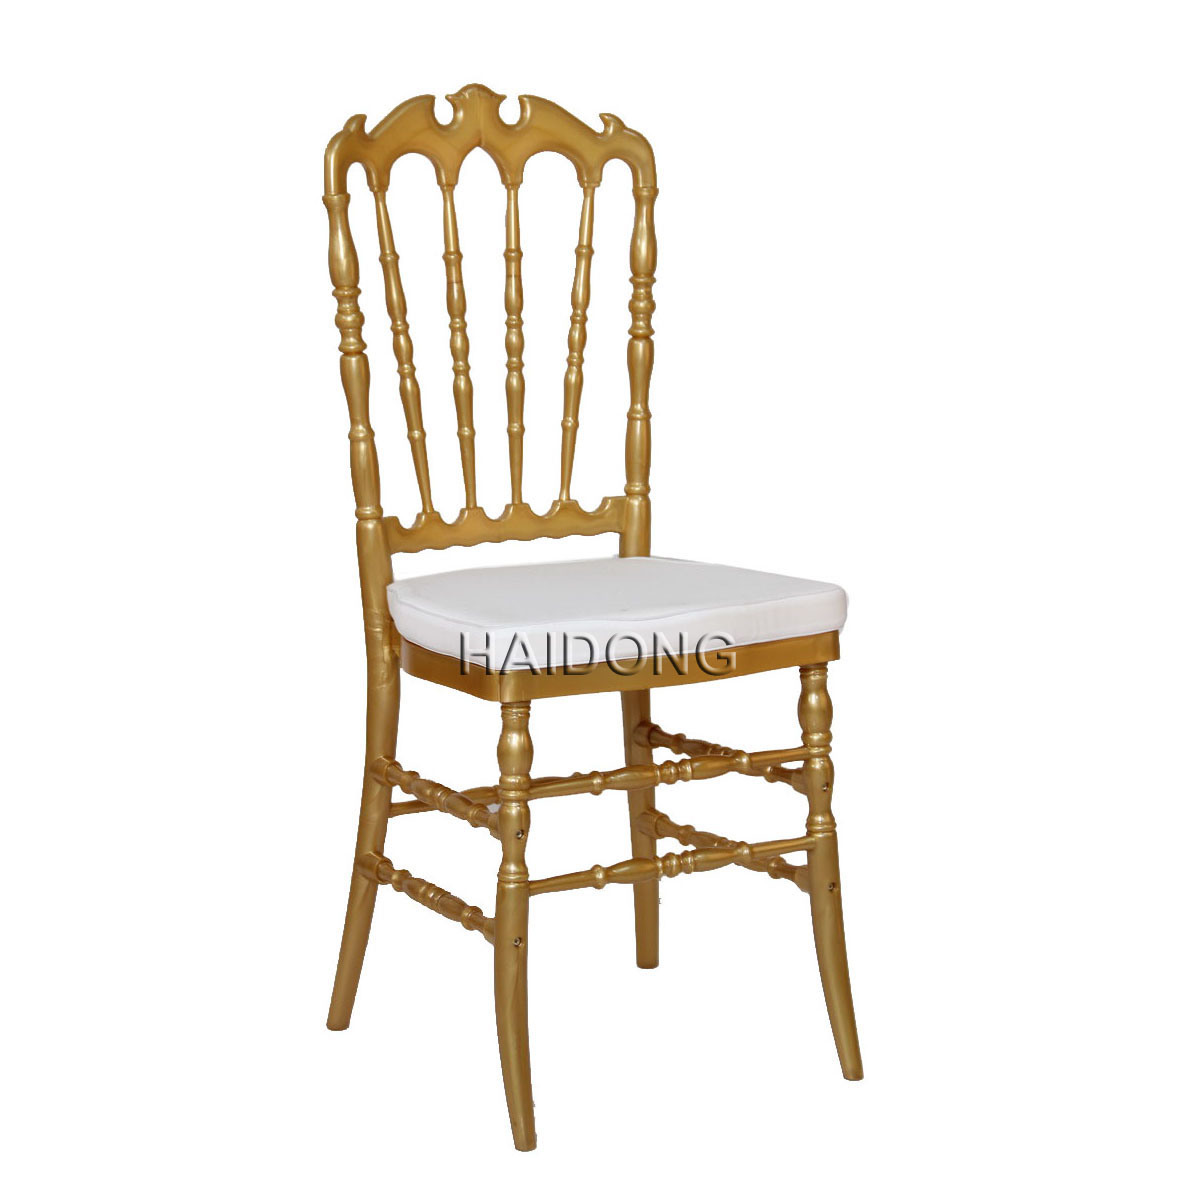 Gold Polycarbonate Resin Royal Chairs